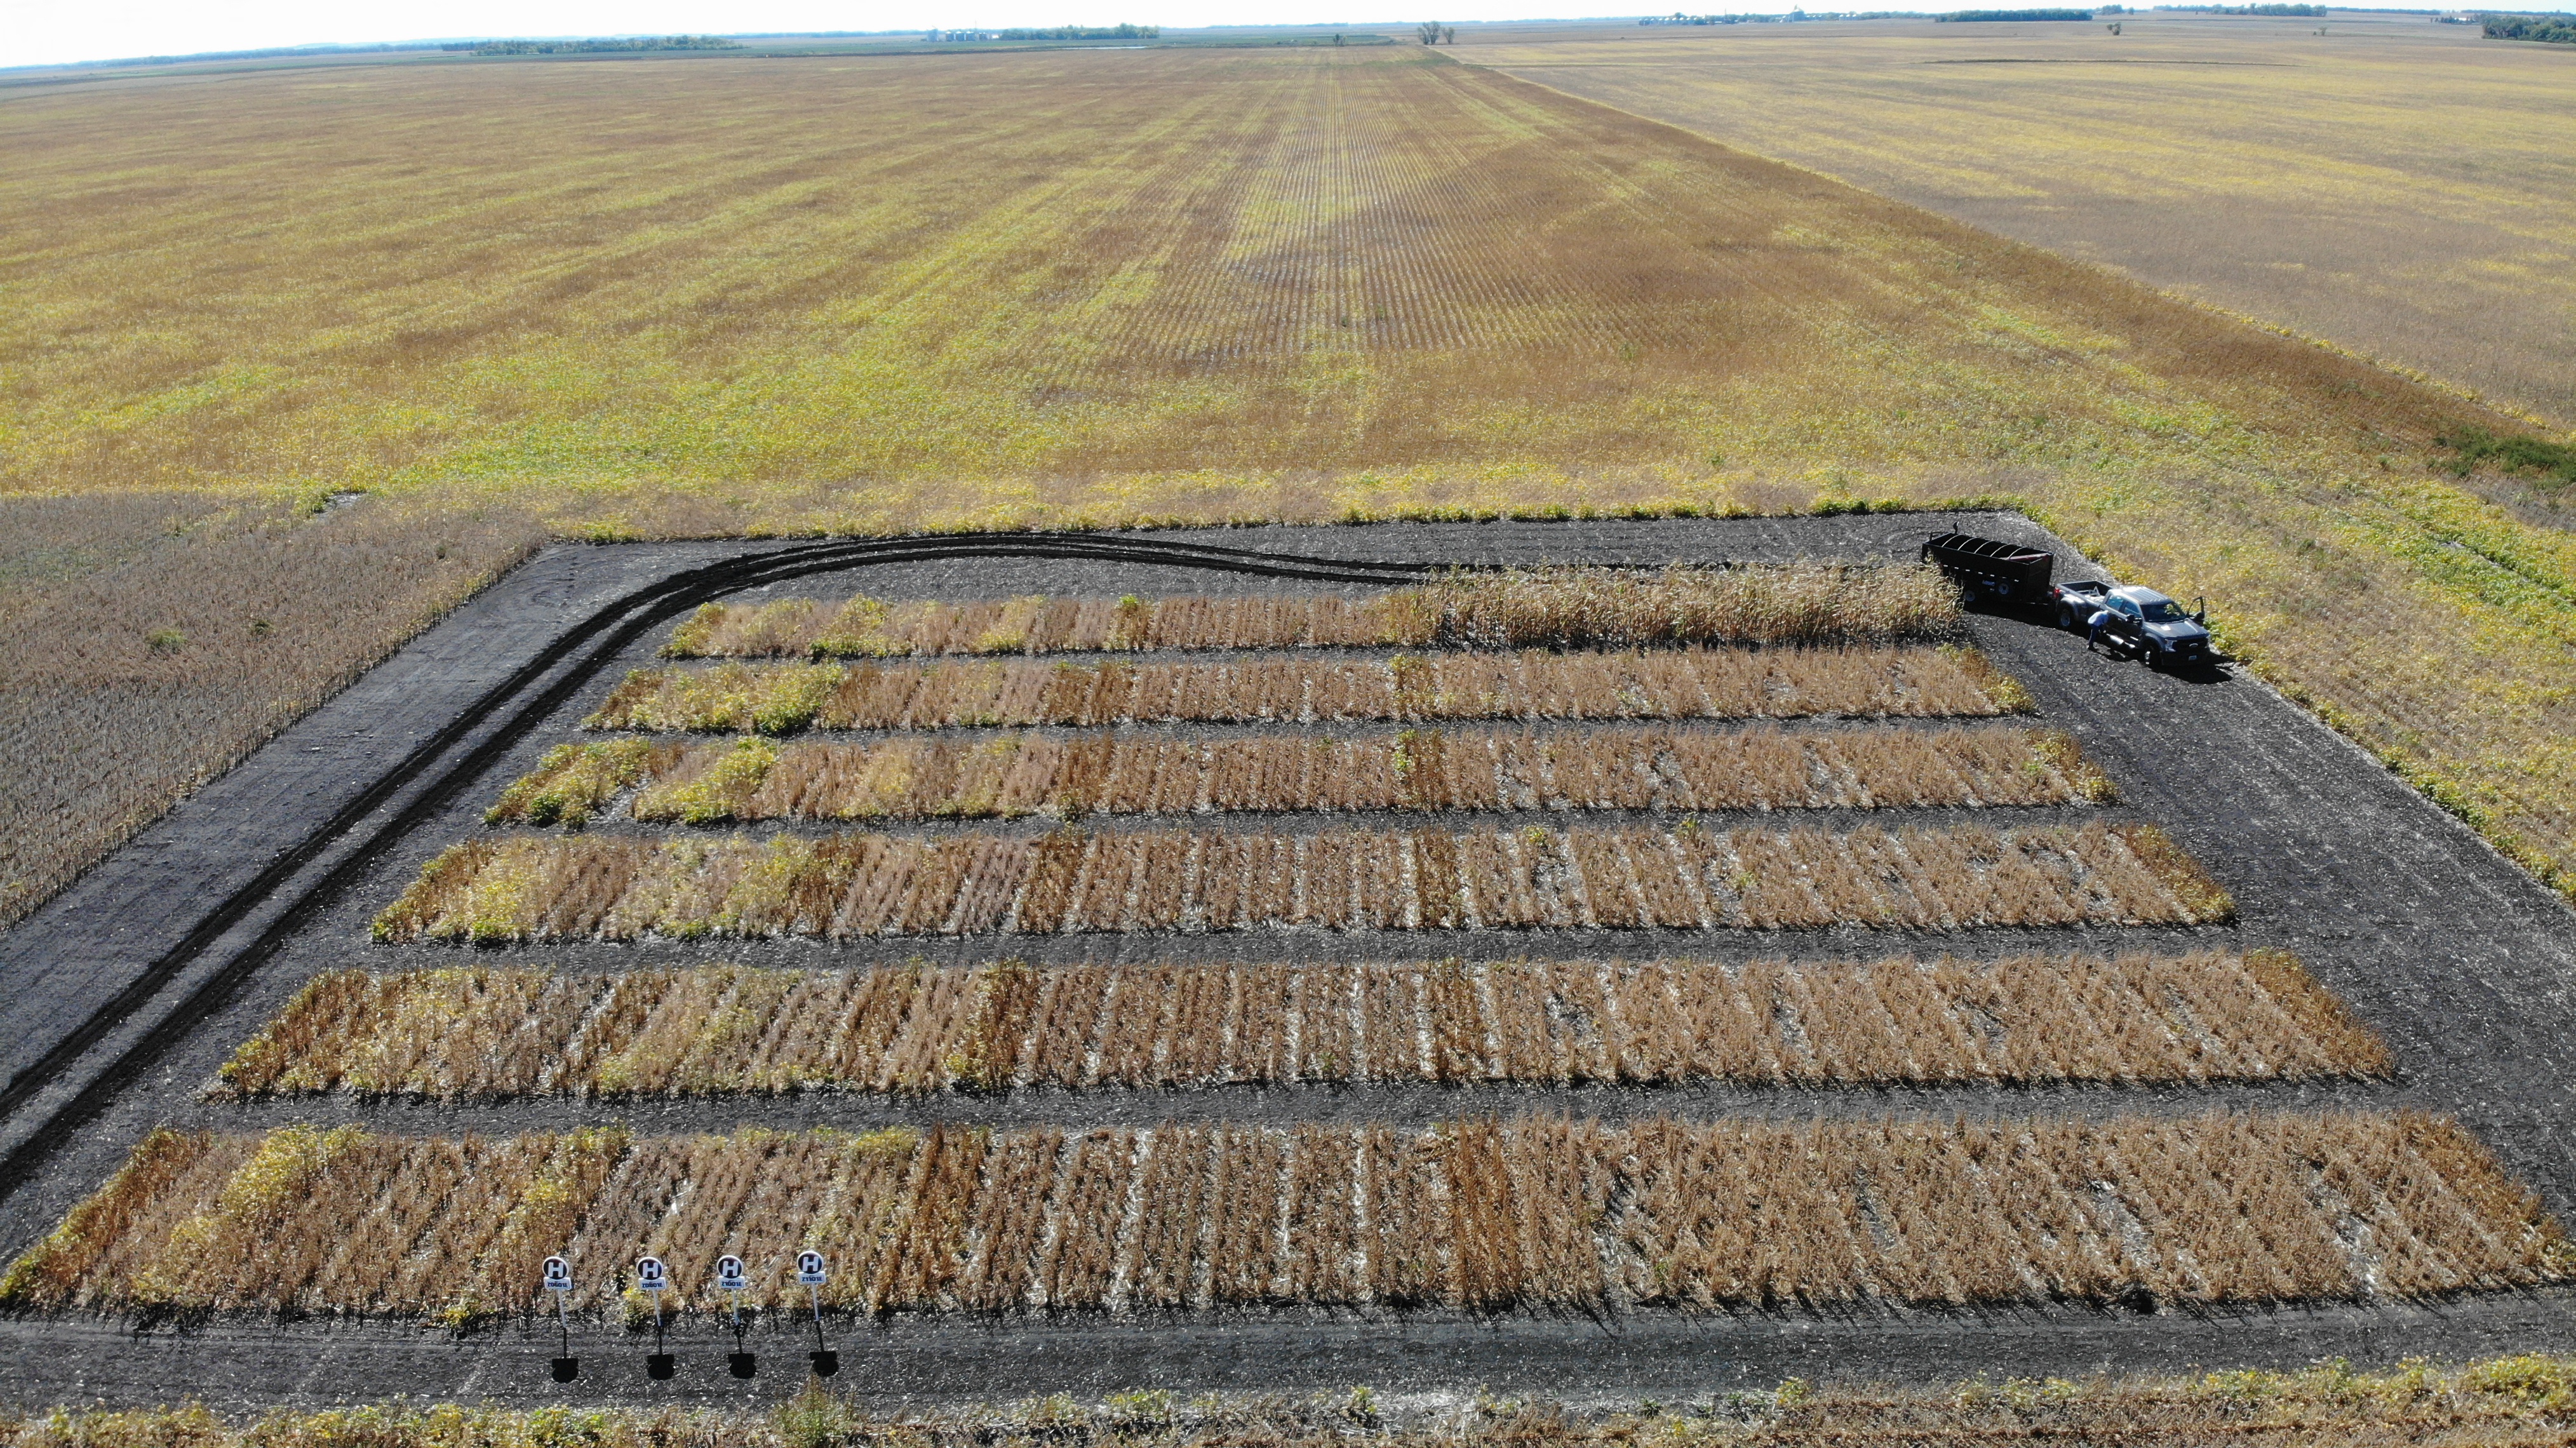 The Getting it Right in Soybean Production conference will include data from the soybean management research conducted at this plot near Lisbon, N.D. (NDSU photo)